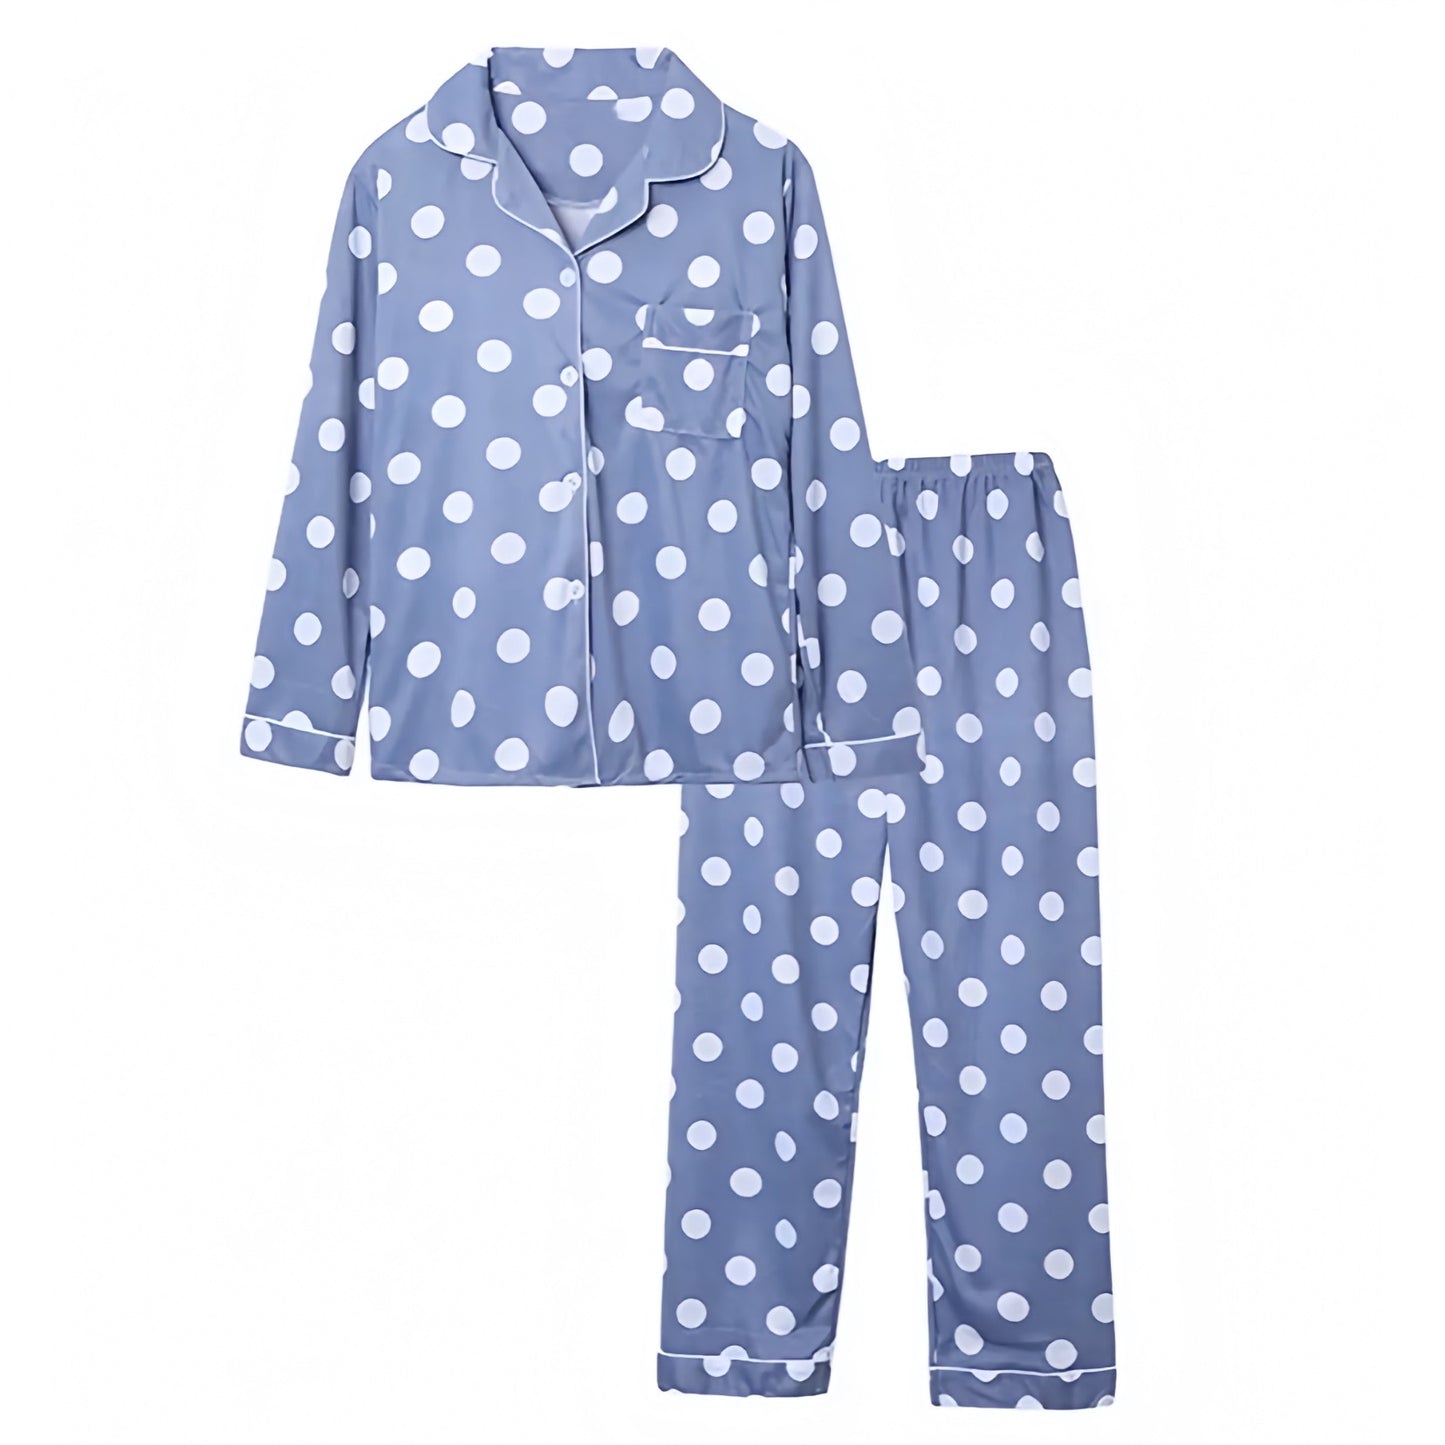 dark-blue-and-white-polka-dot-patterned-cotton-linen-v-neck-button-down-long-sleeve-shirt-top-mid-low-rise-pants-bottoms-pajama-two-piece-set-pjs-cozy-comfy-lounge-wear-women-ladies-chic-trendy-spring-2024-summer-preppy-style-casual-feminine-coastal-granddaughter-classy-elegant-eber-jey-roller-rabbit-dupe